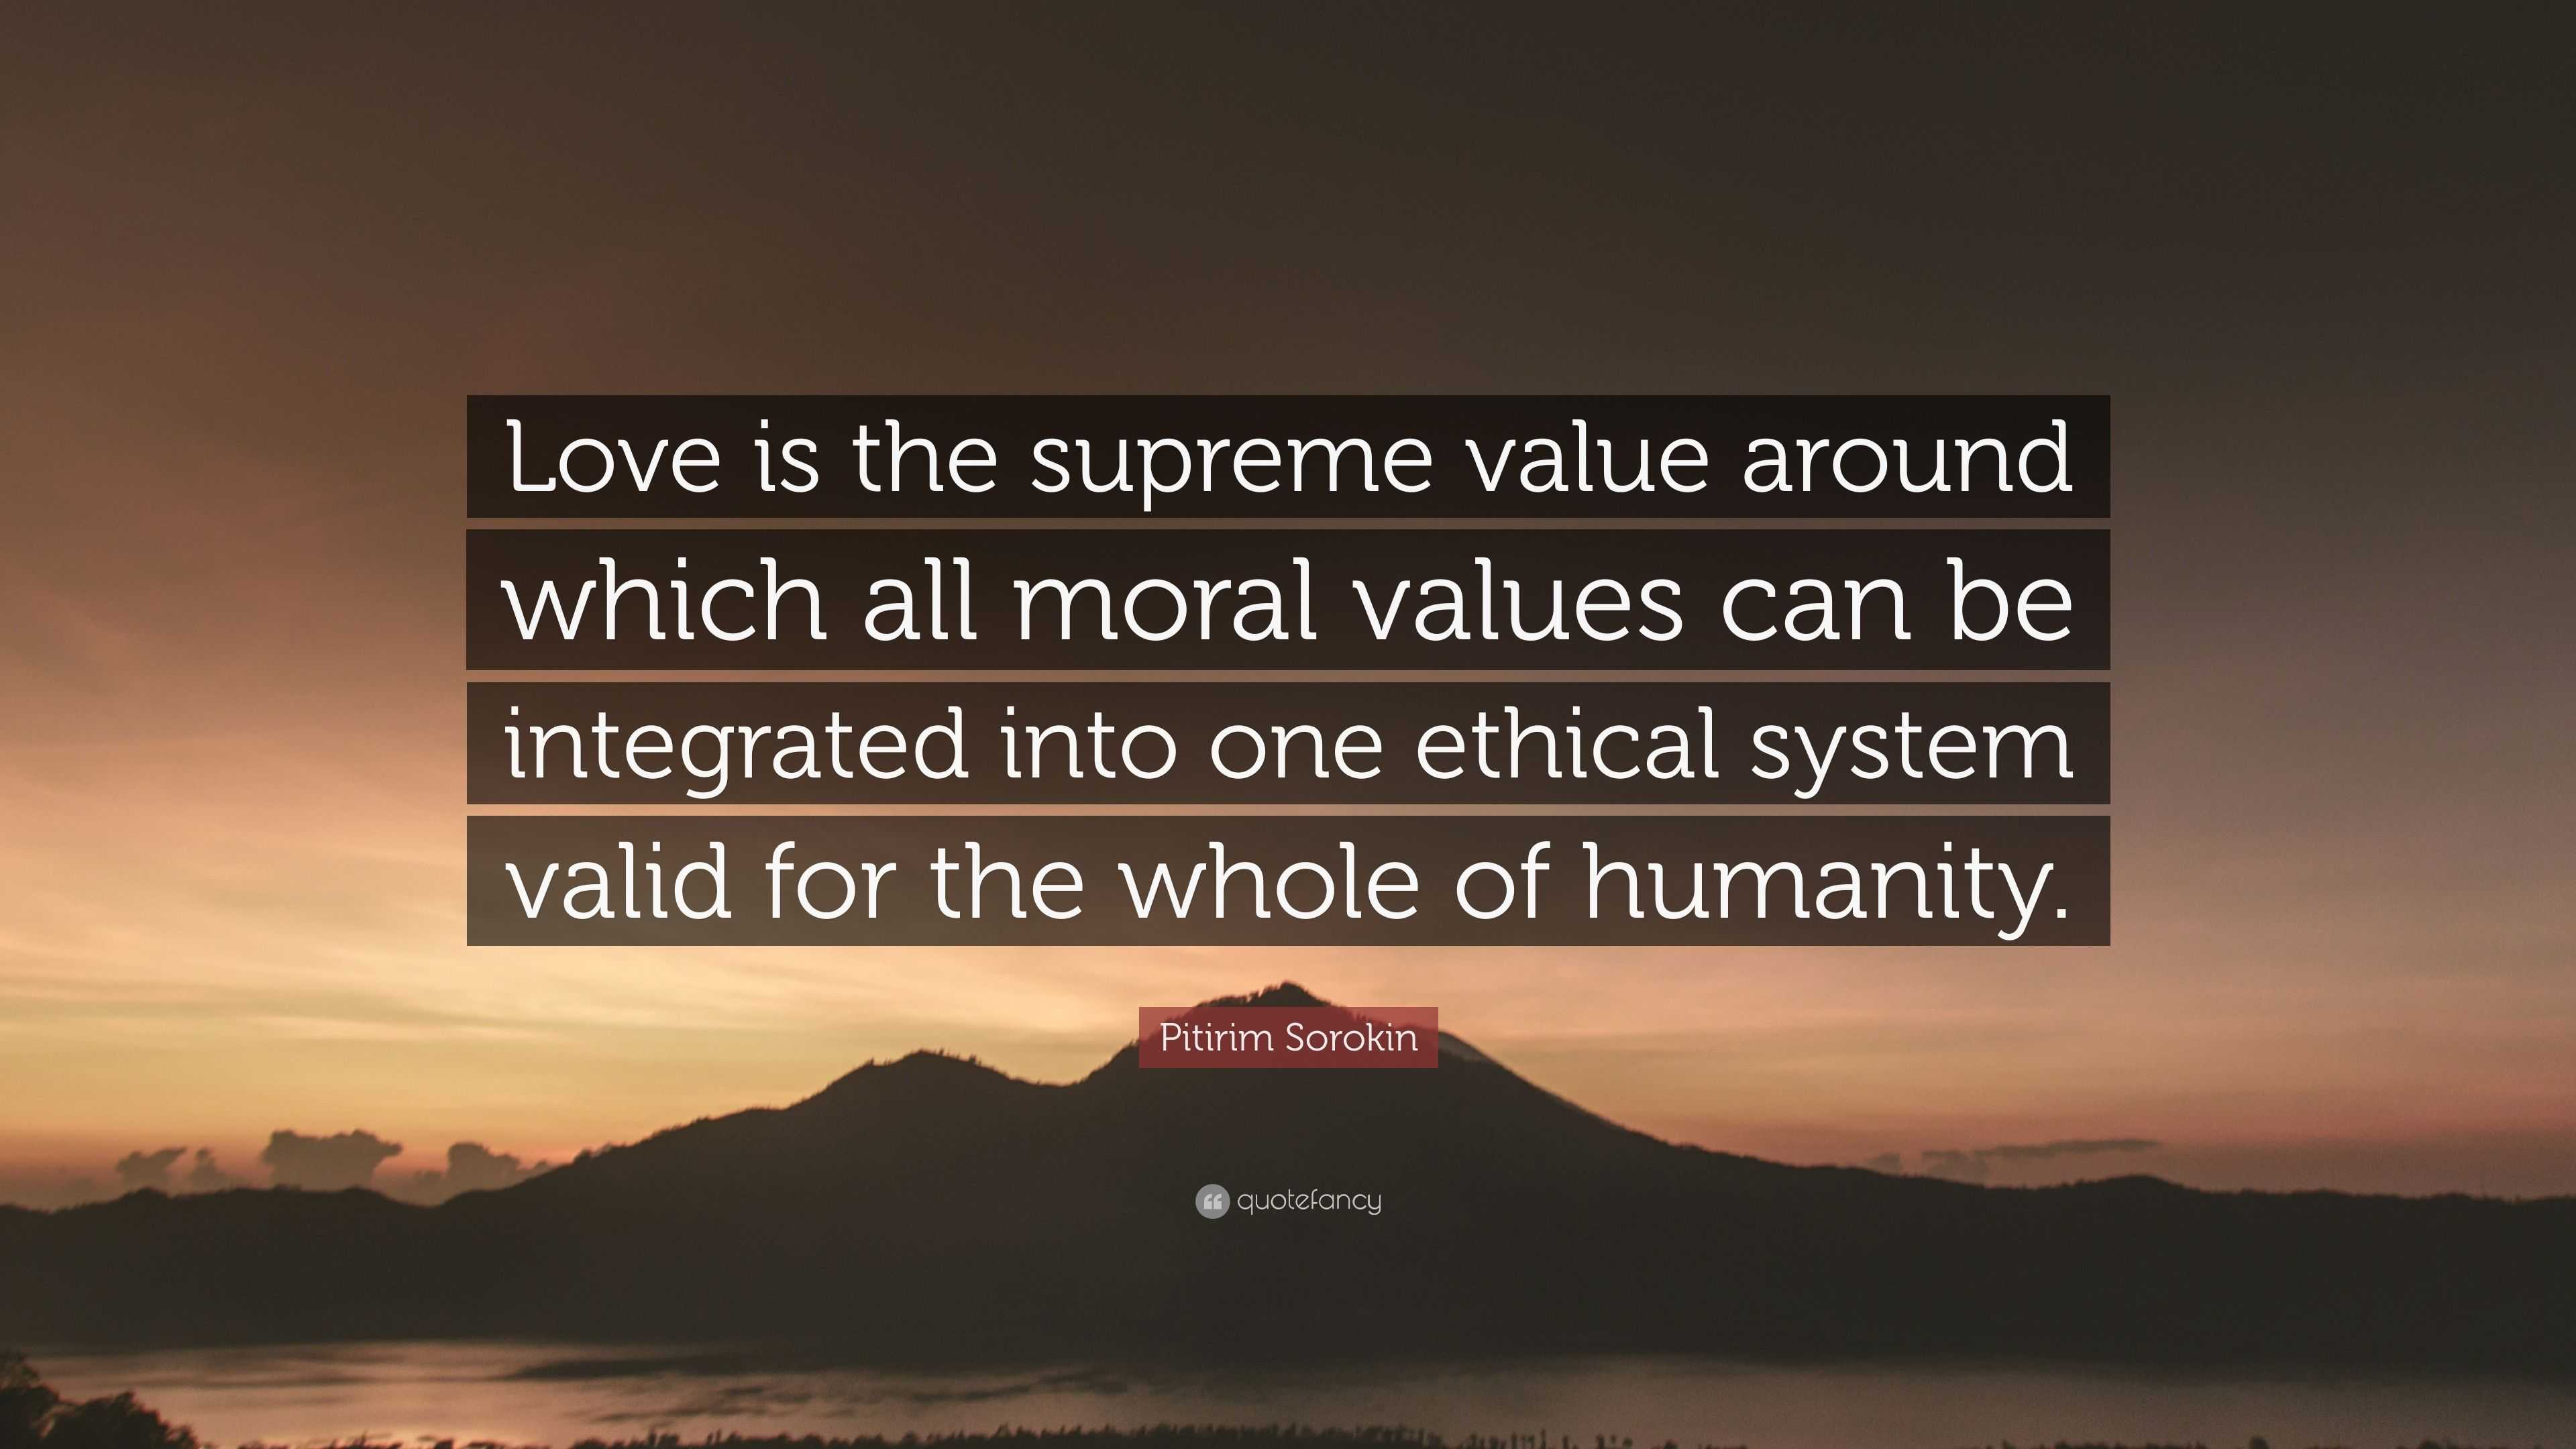 What is supreme values?